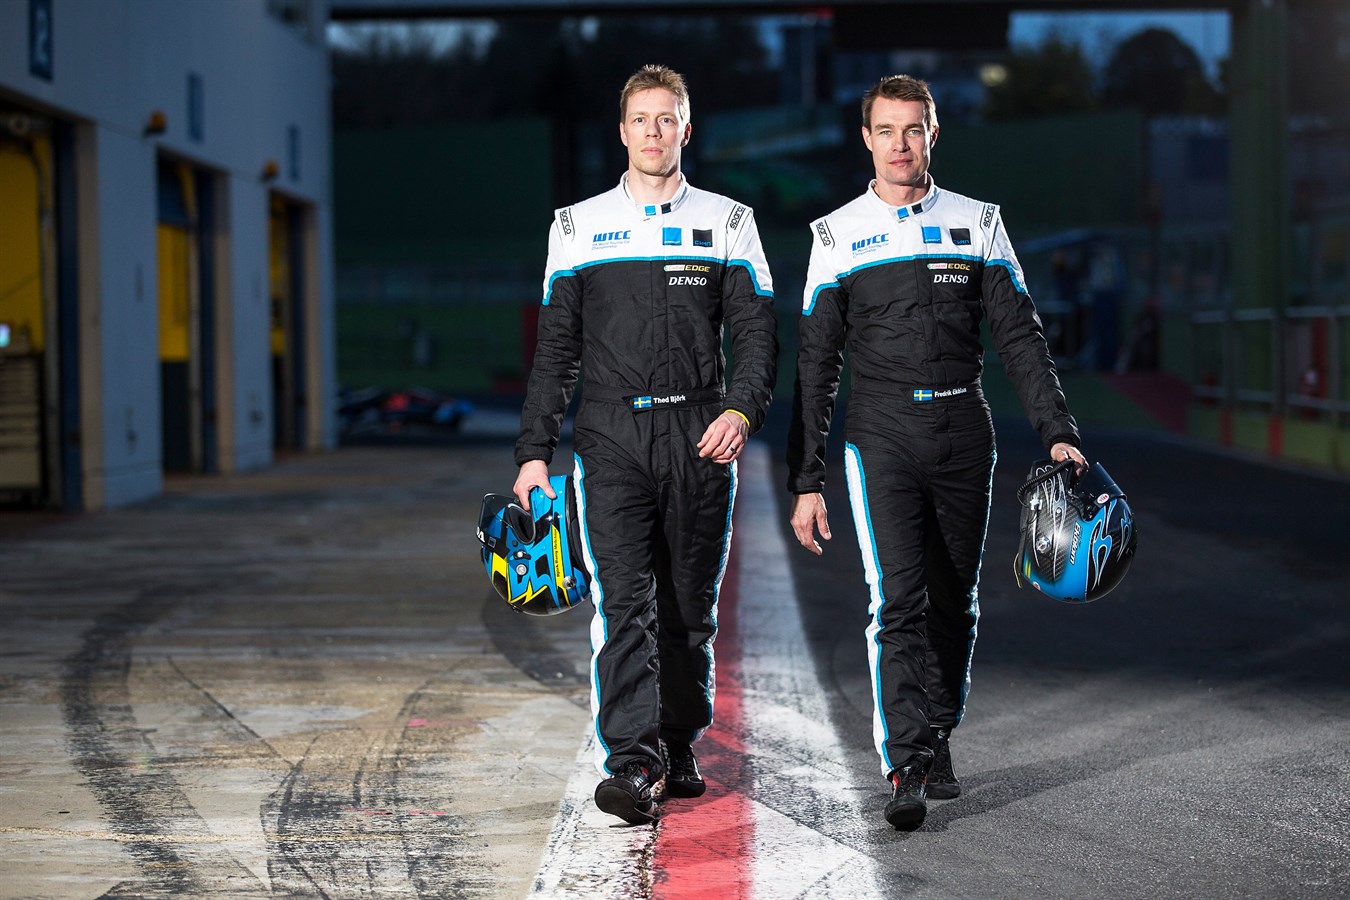 The WTCC challenge starts this weekend for Polestar Cyan Racing